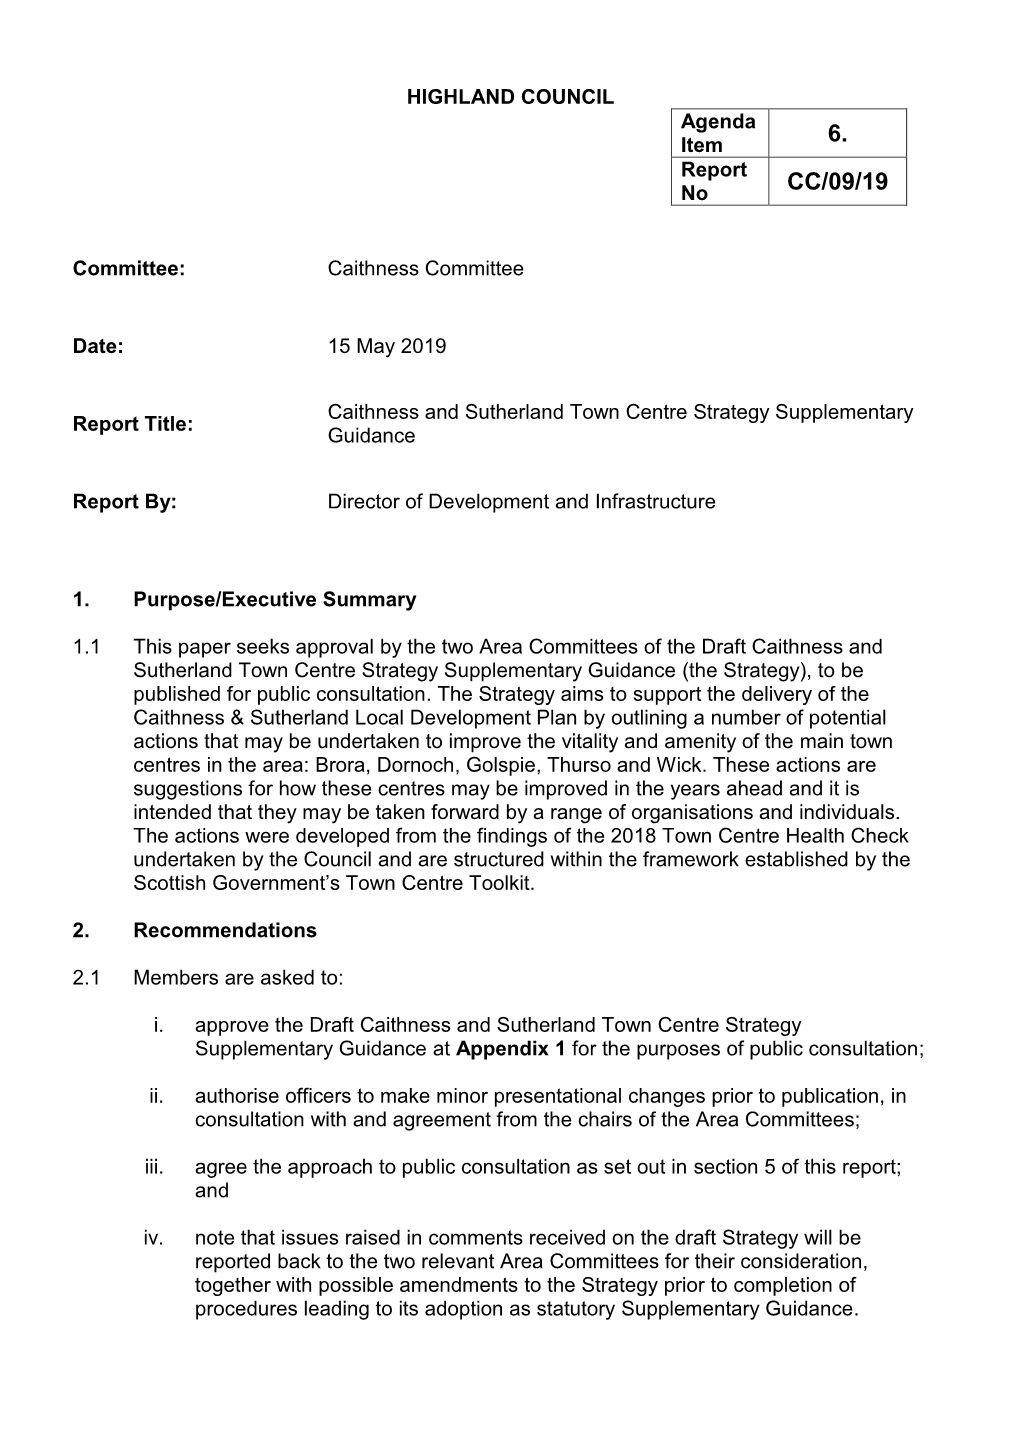 Caithness and Sutherland Town Centre Strategy Supplementary Report Title: Guidance